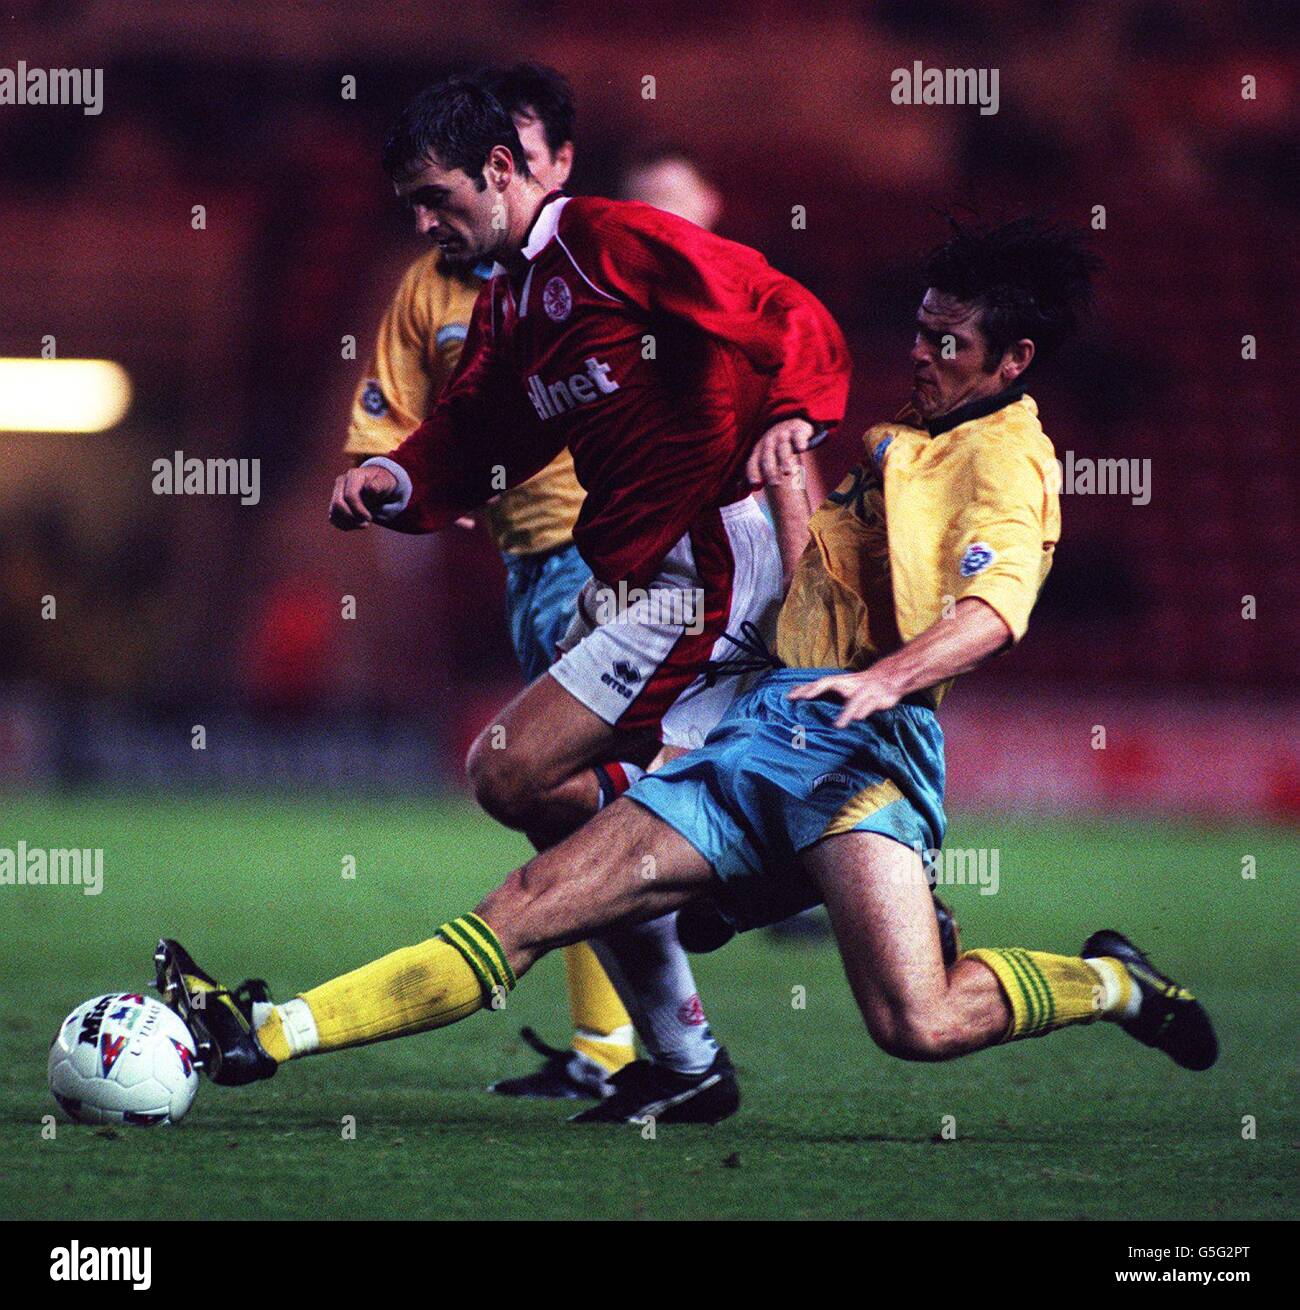 L-R: ALAN MOORE, MIDDLESBROUGH. MARC EDWORTHY, CRYSTAL PALACE ****** M v CP Stock Photo